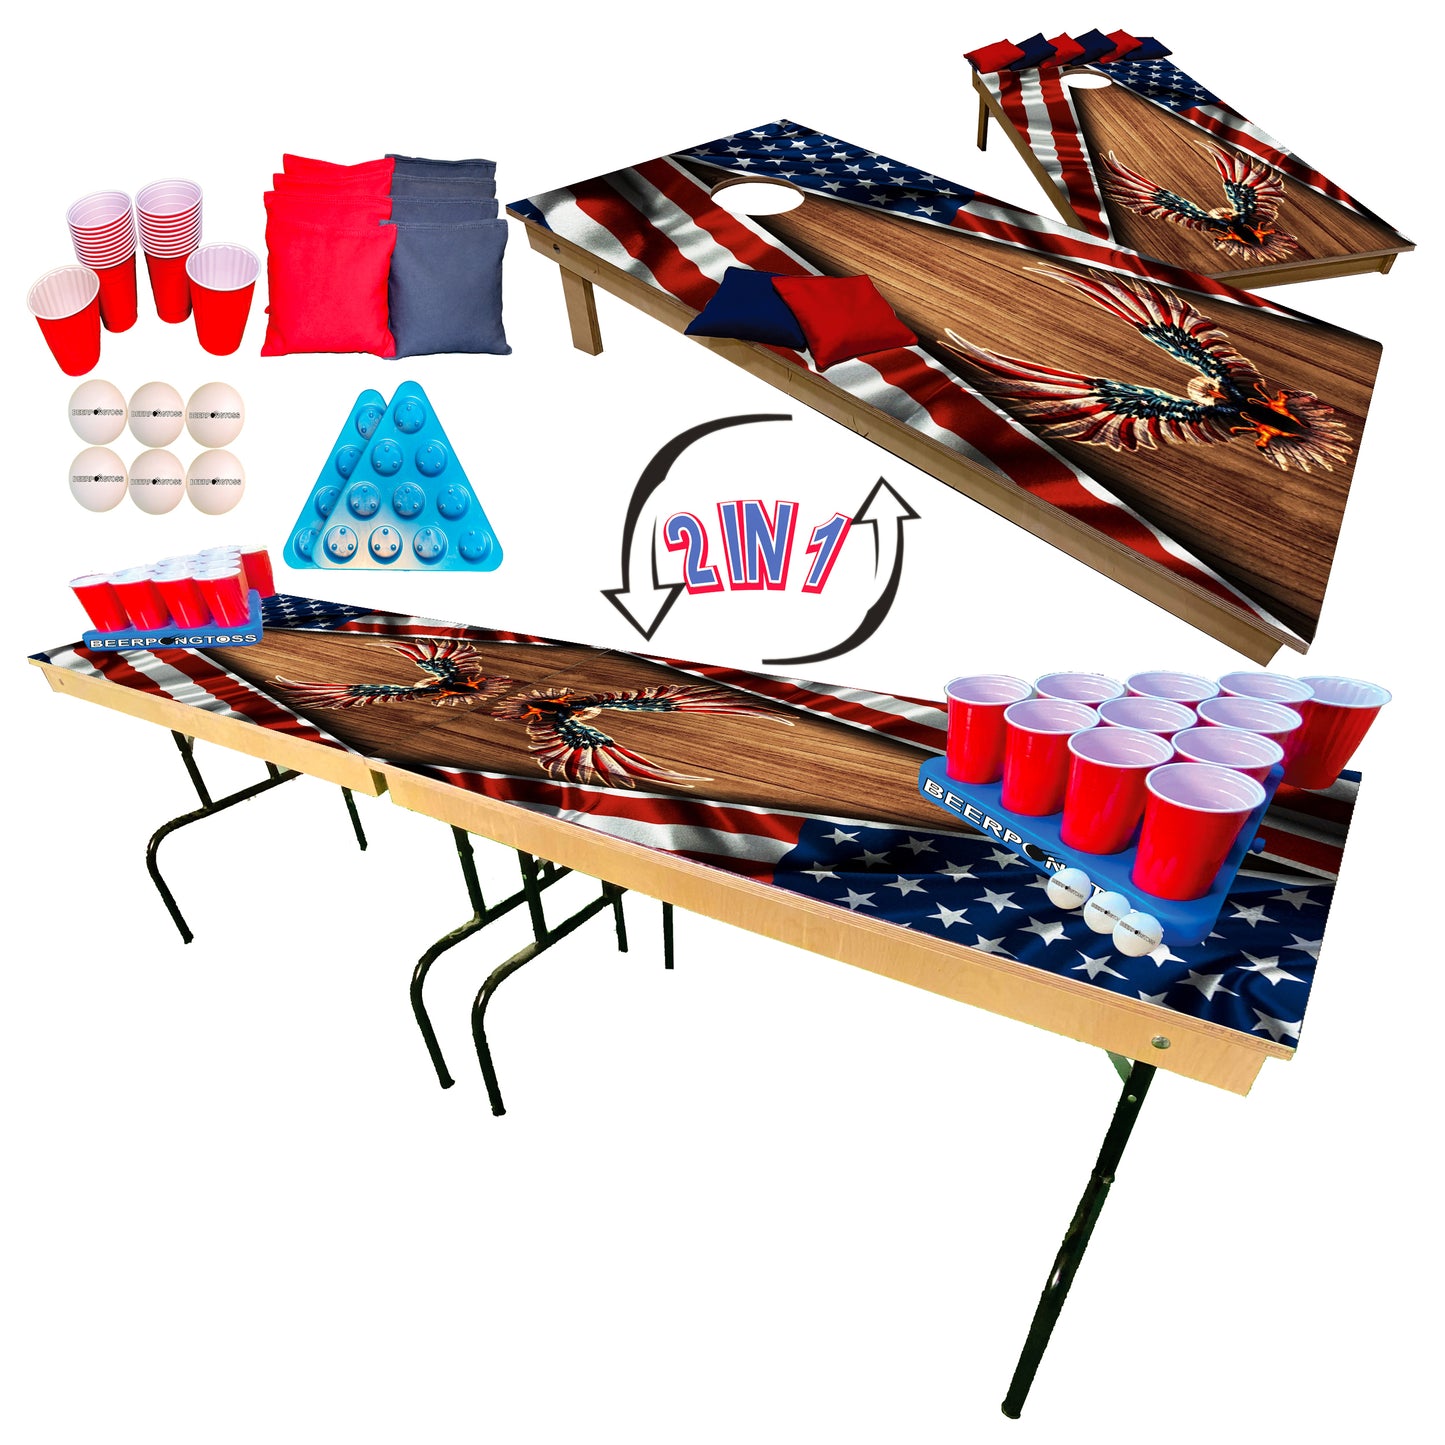 2-in-1 Cornhole & Pong Table - Flying Wood Eagle